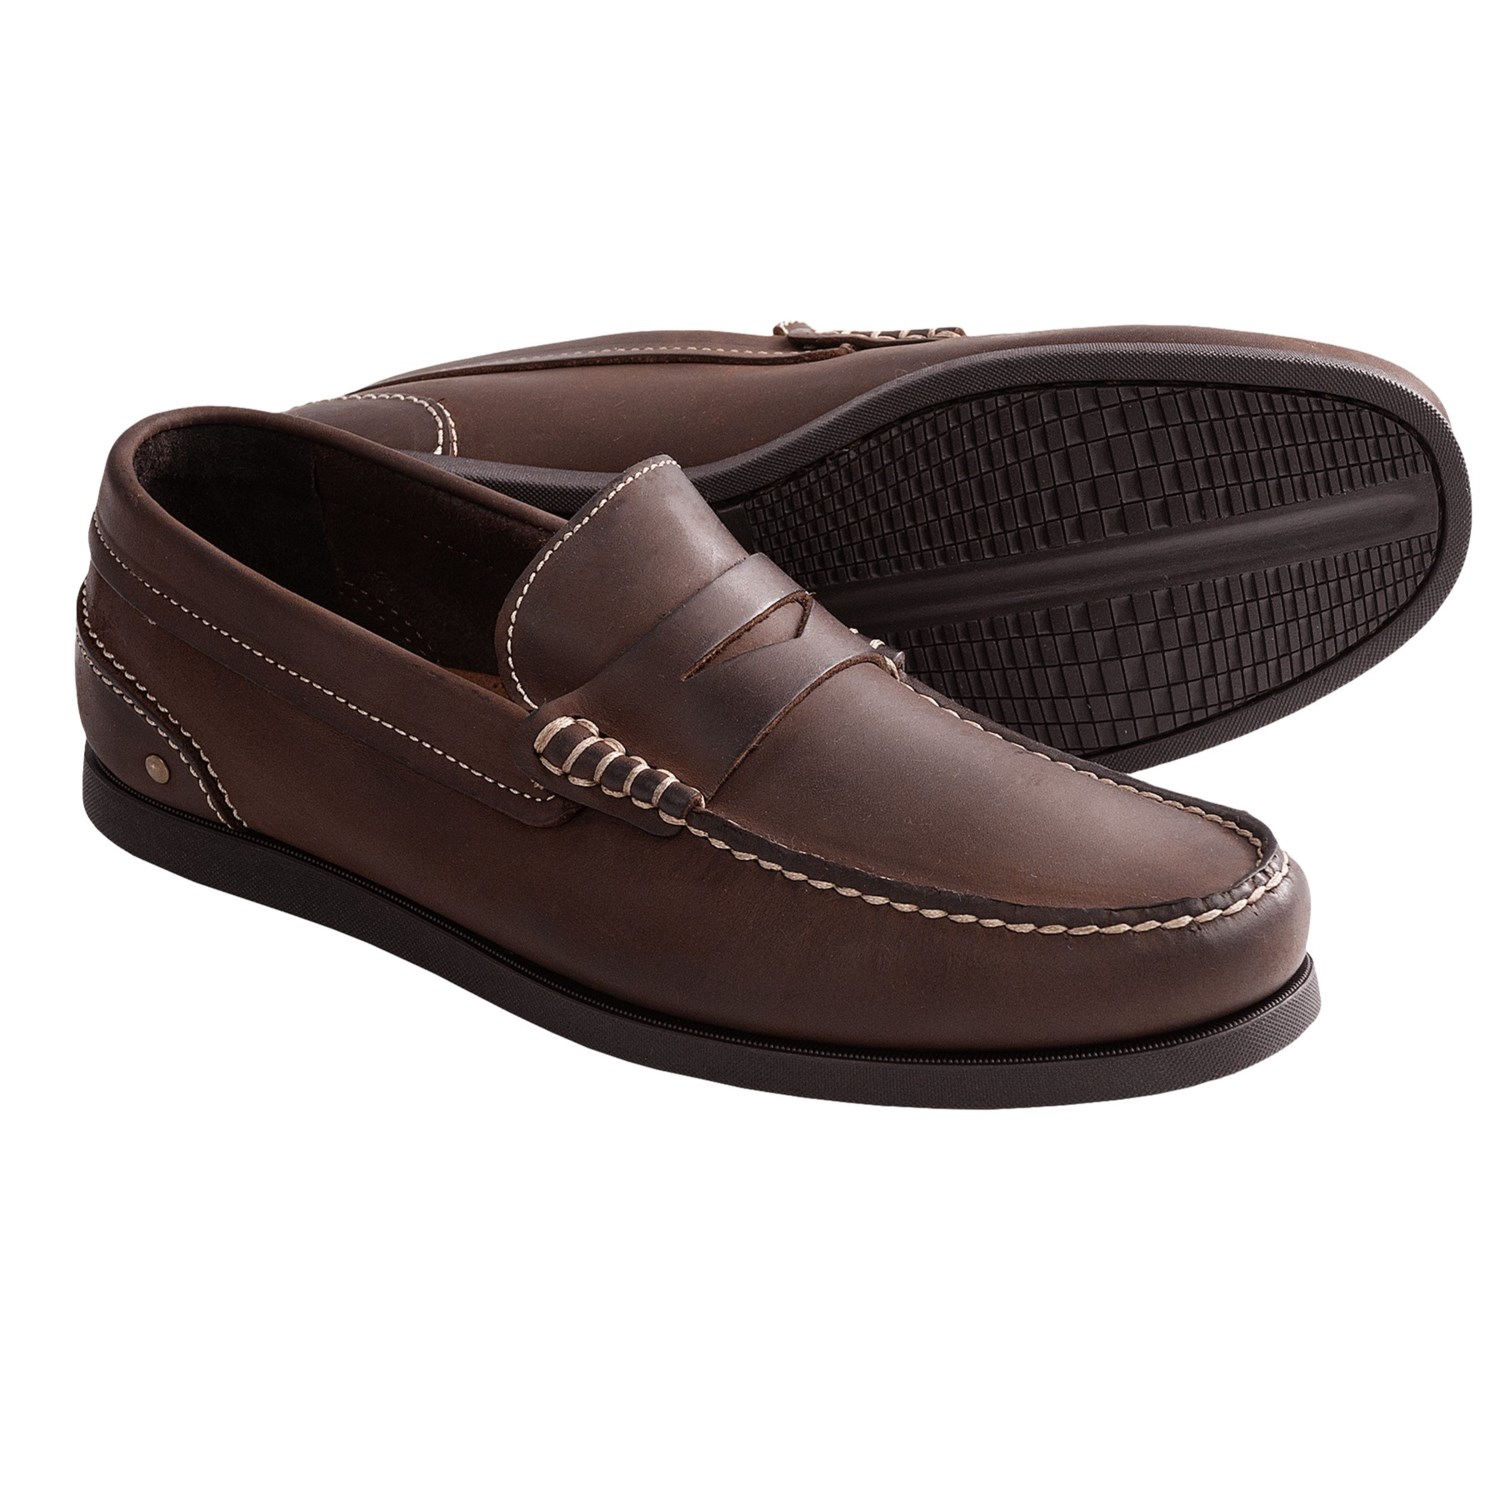 Johnston & Murphy Barnaby Penny Loafer Shoes - Nubuck (For Men) - Save 35%